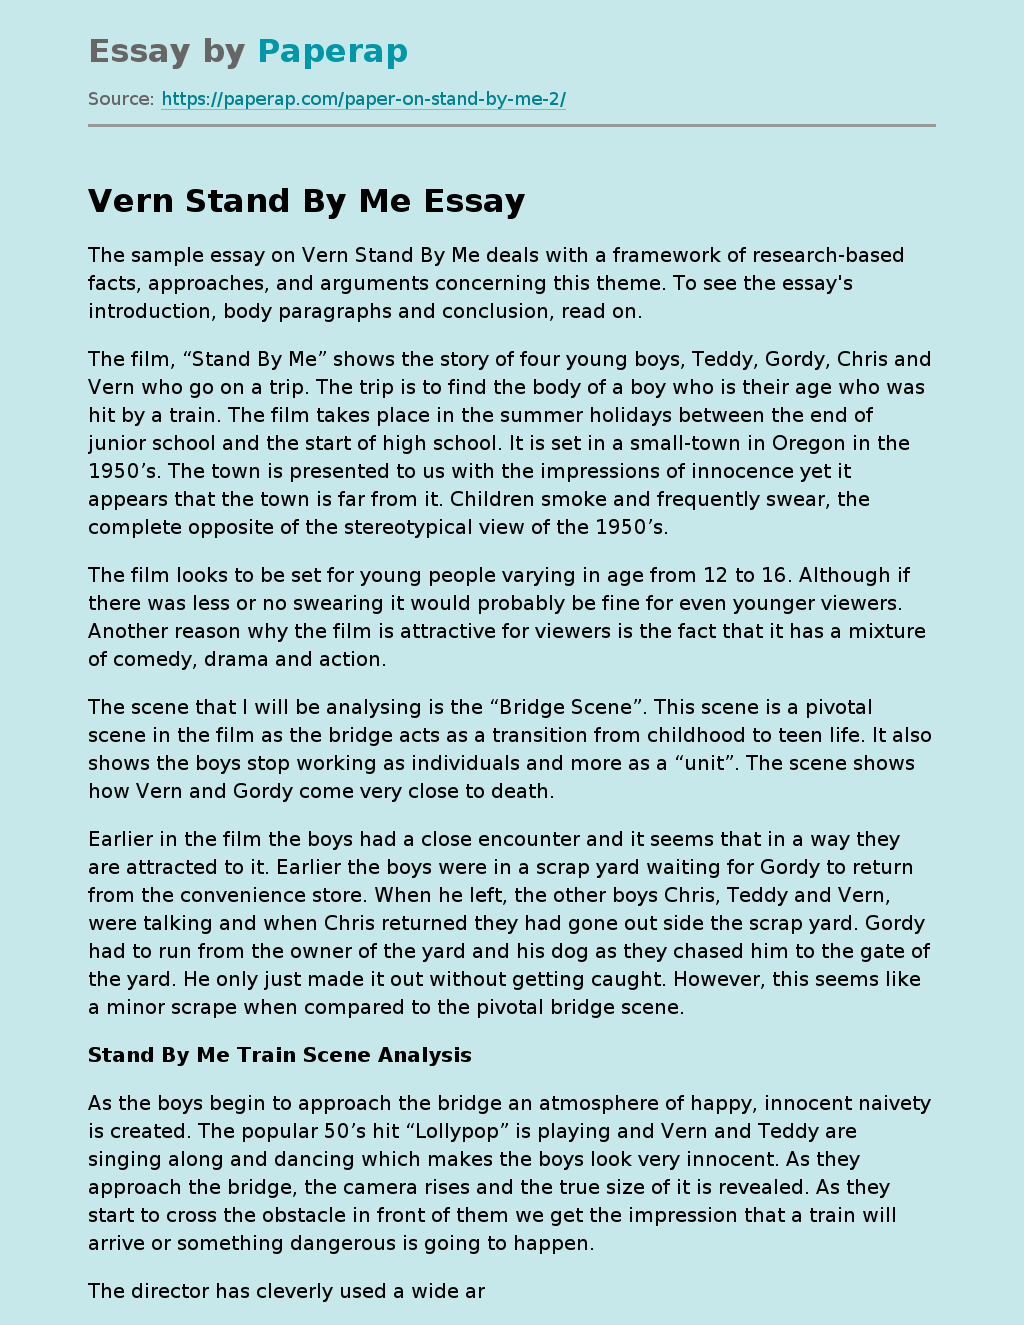 Vern Stand By Me